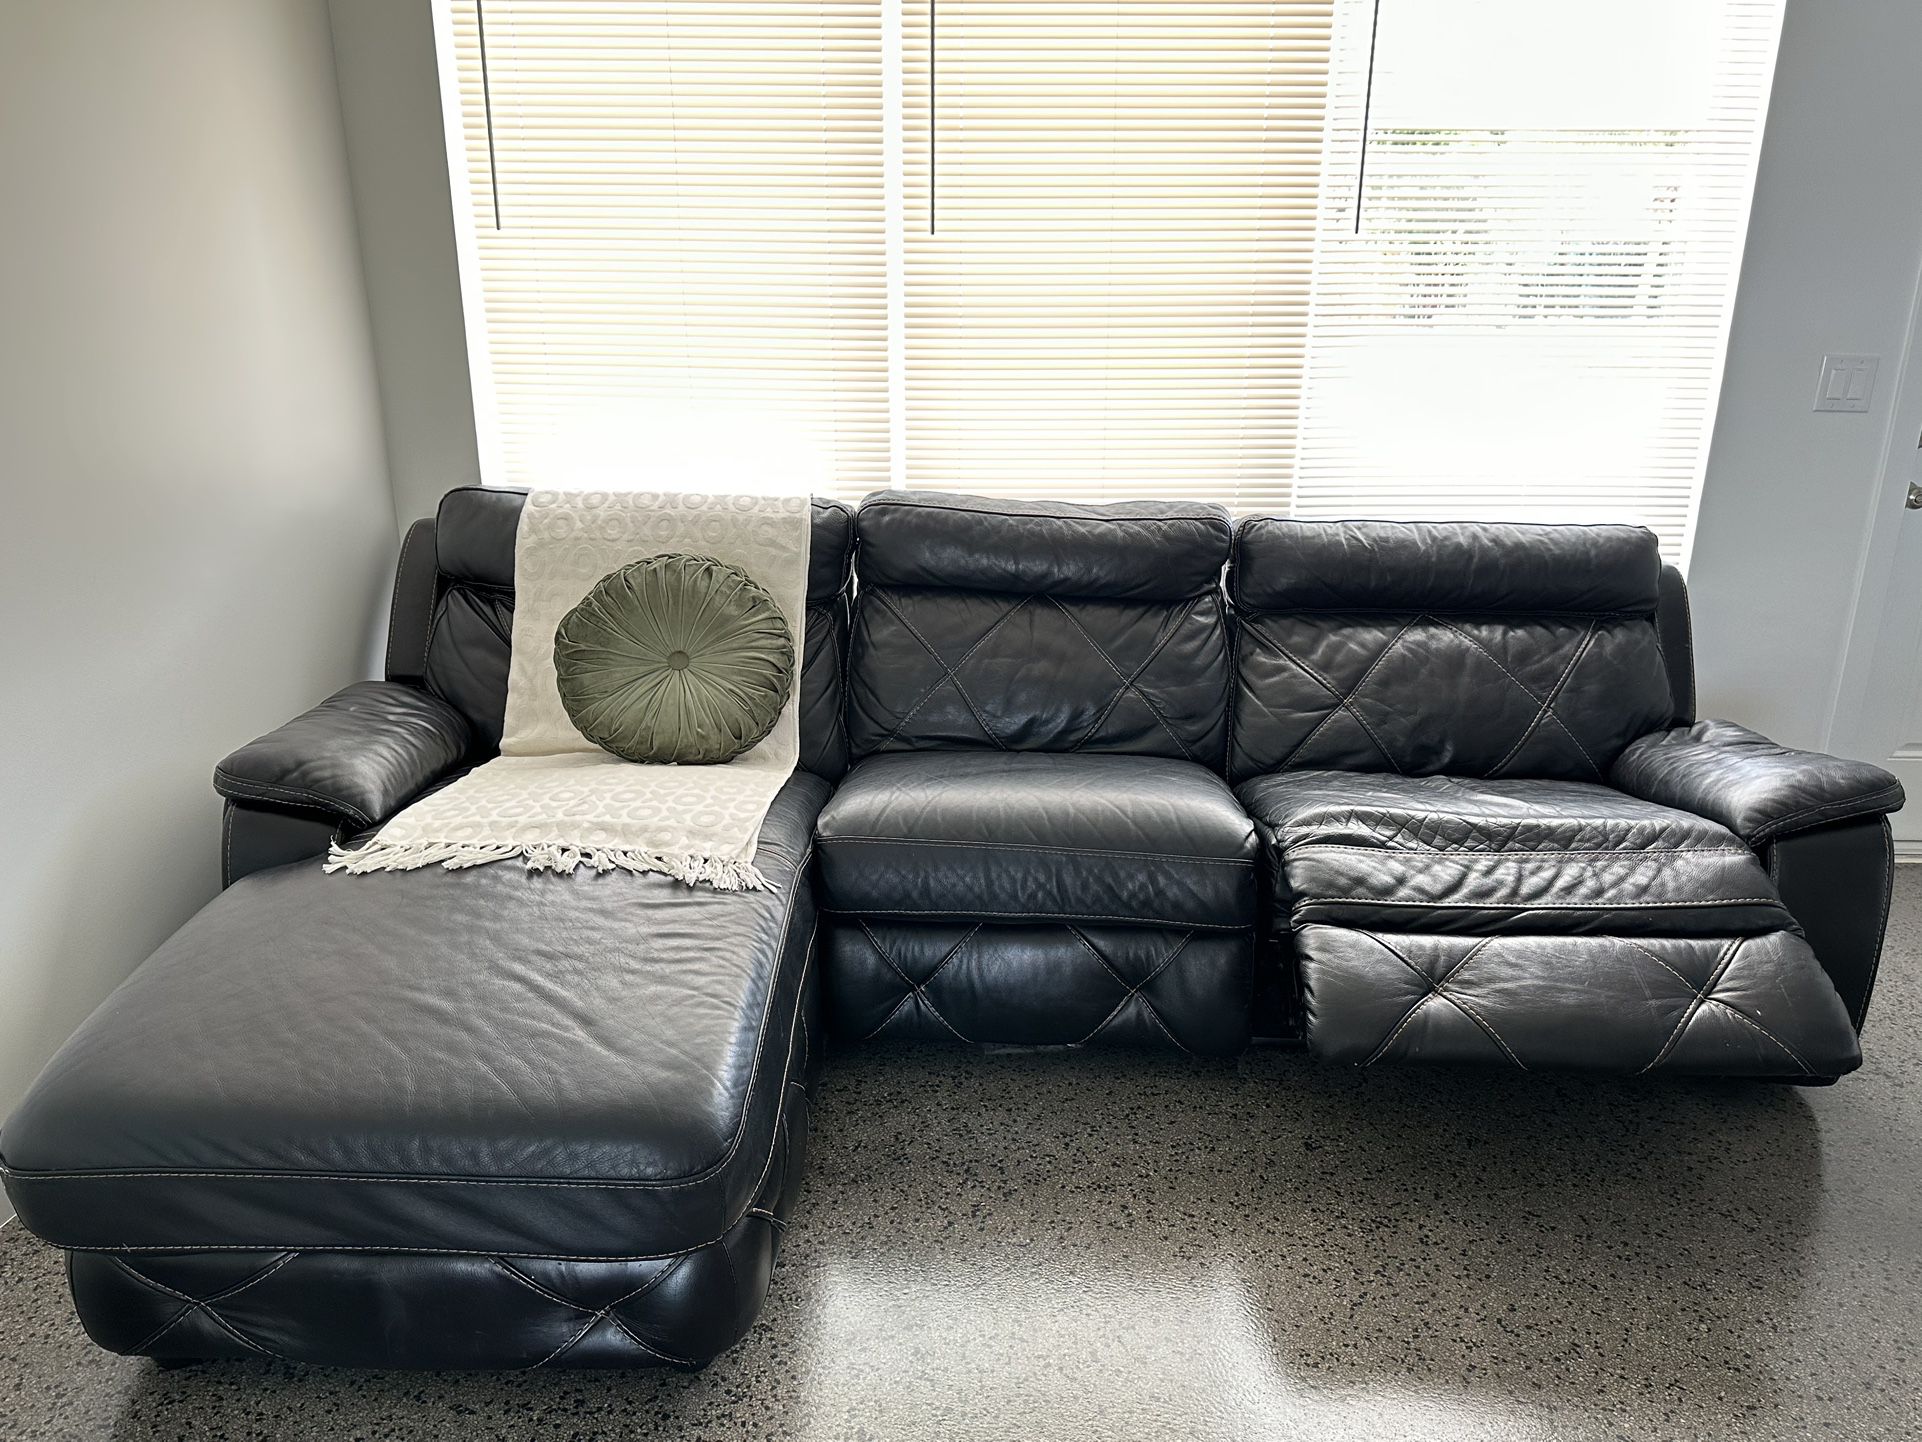 NICE BLACK LEATHER COUCH - THREE PIECES 